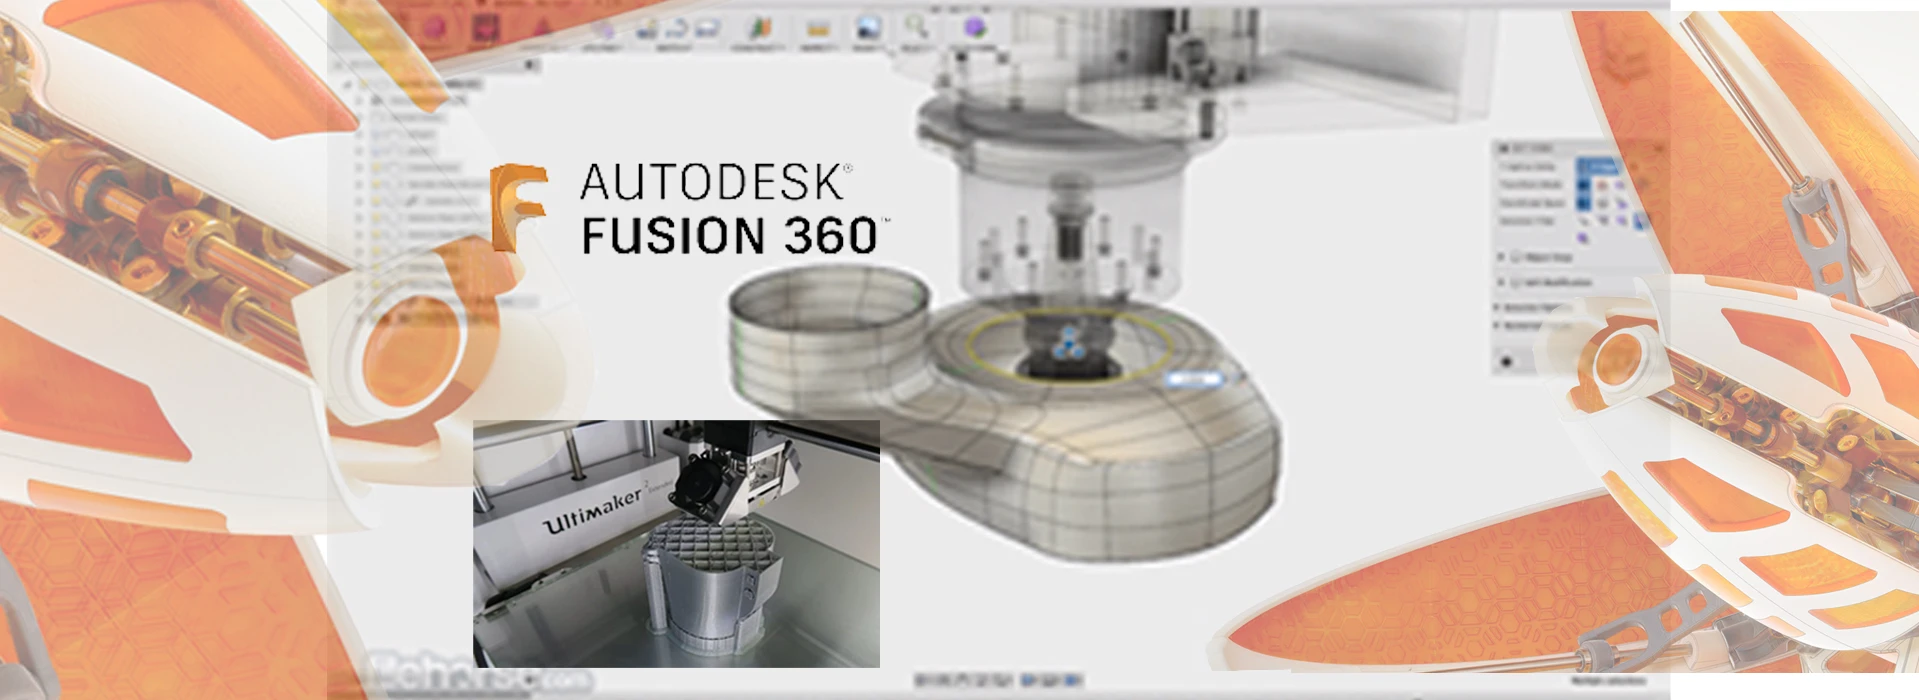 FABRICATION ADDITIVE & IMPRESSION 3D- METIER